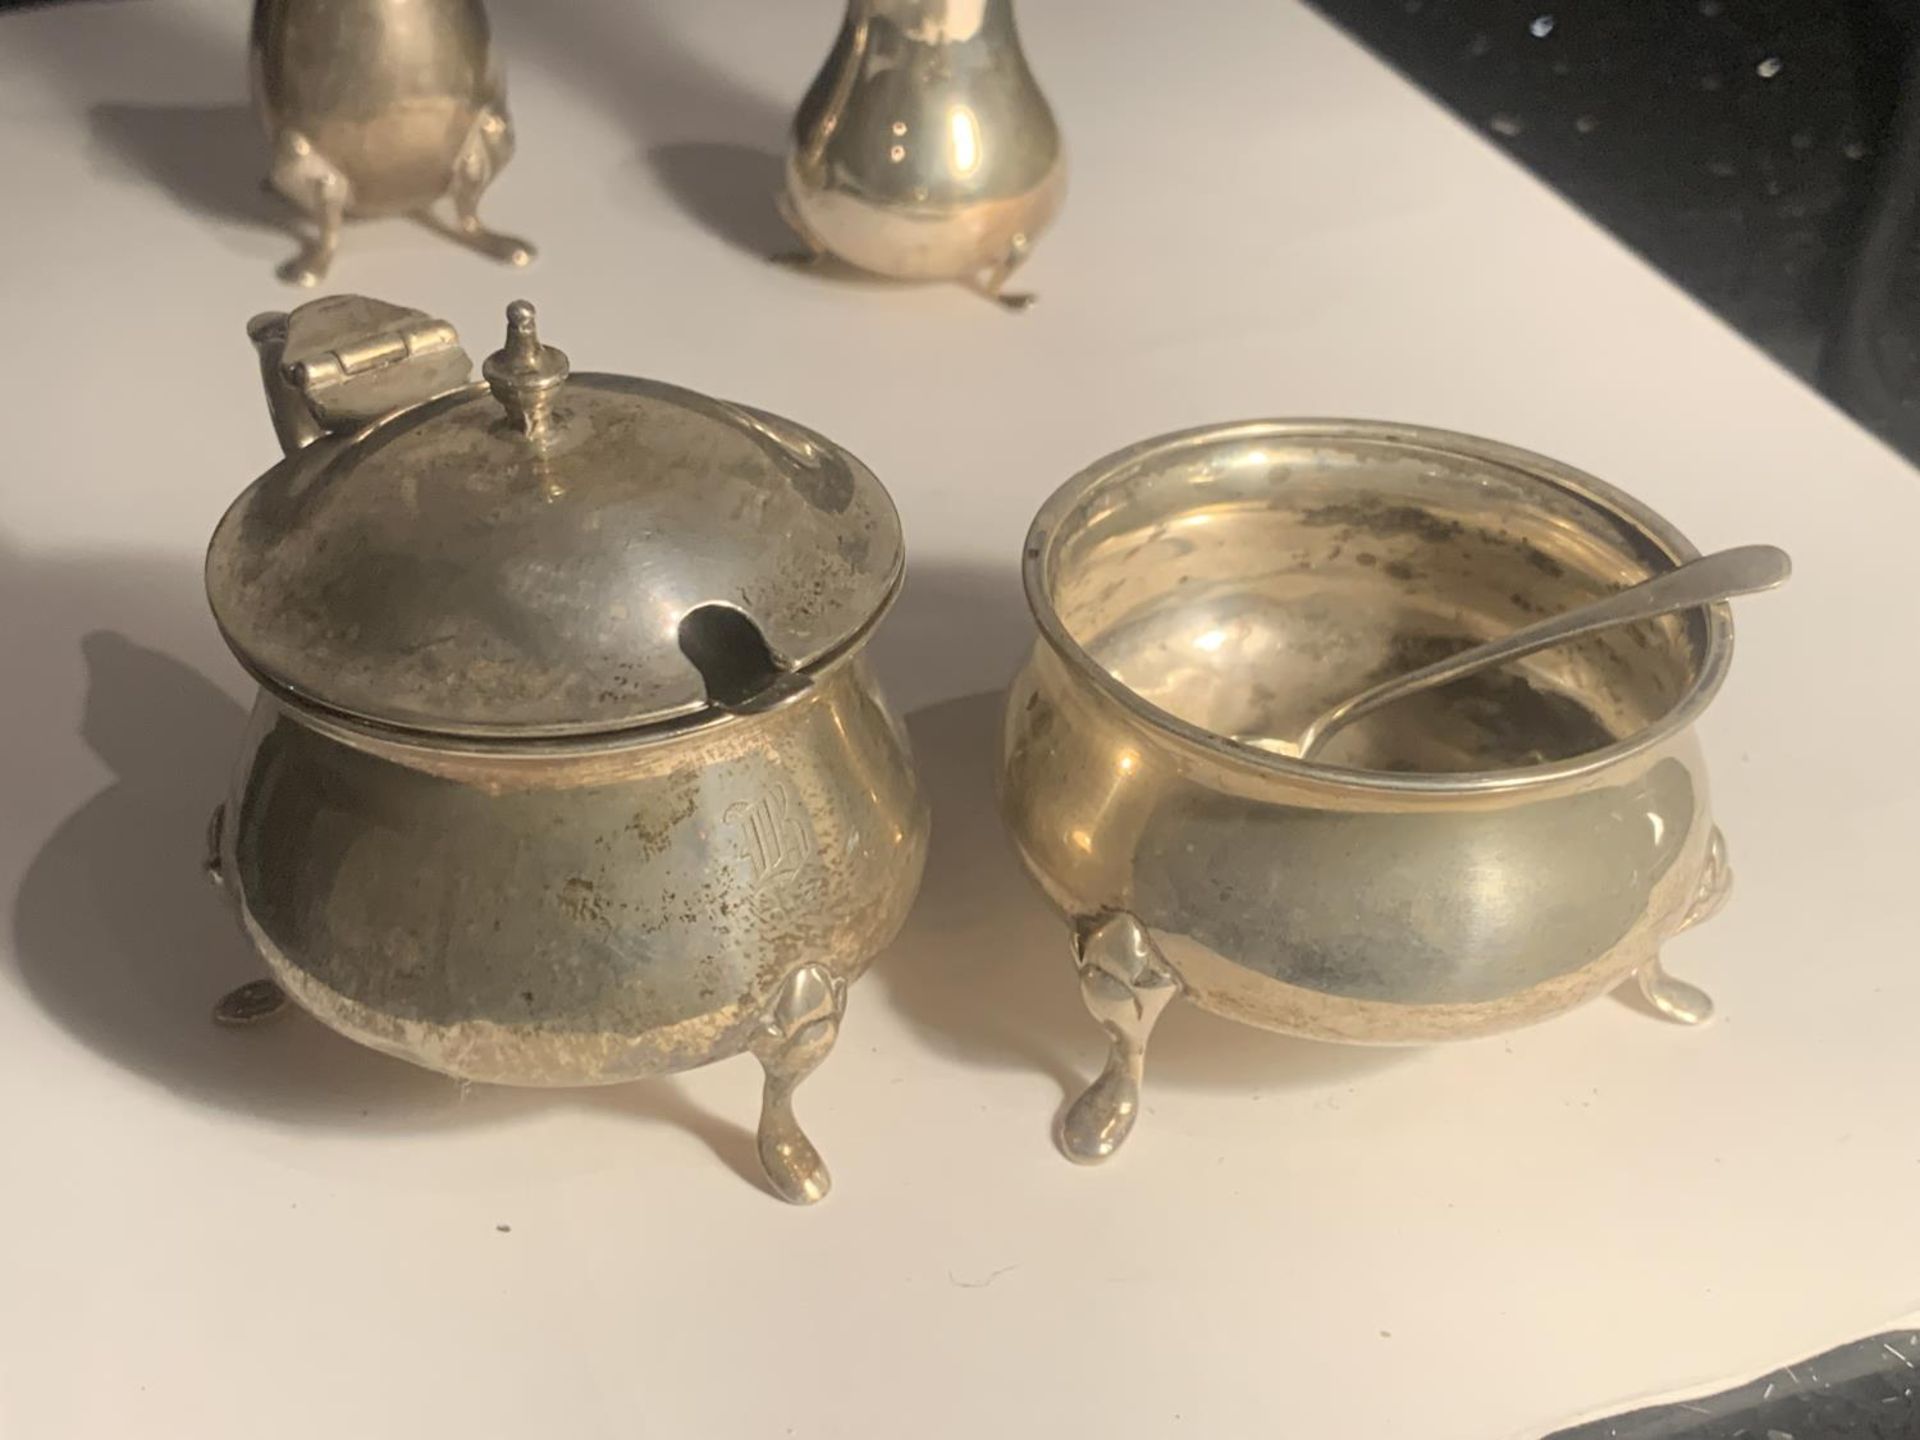 A HALLMARKED BIRMINGHAM SILVER CRUET SET WITH TWO SPOONS GROSS WEIGHT 133.7 GRAMS - Image 6 of 6